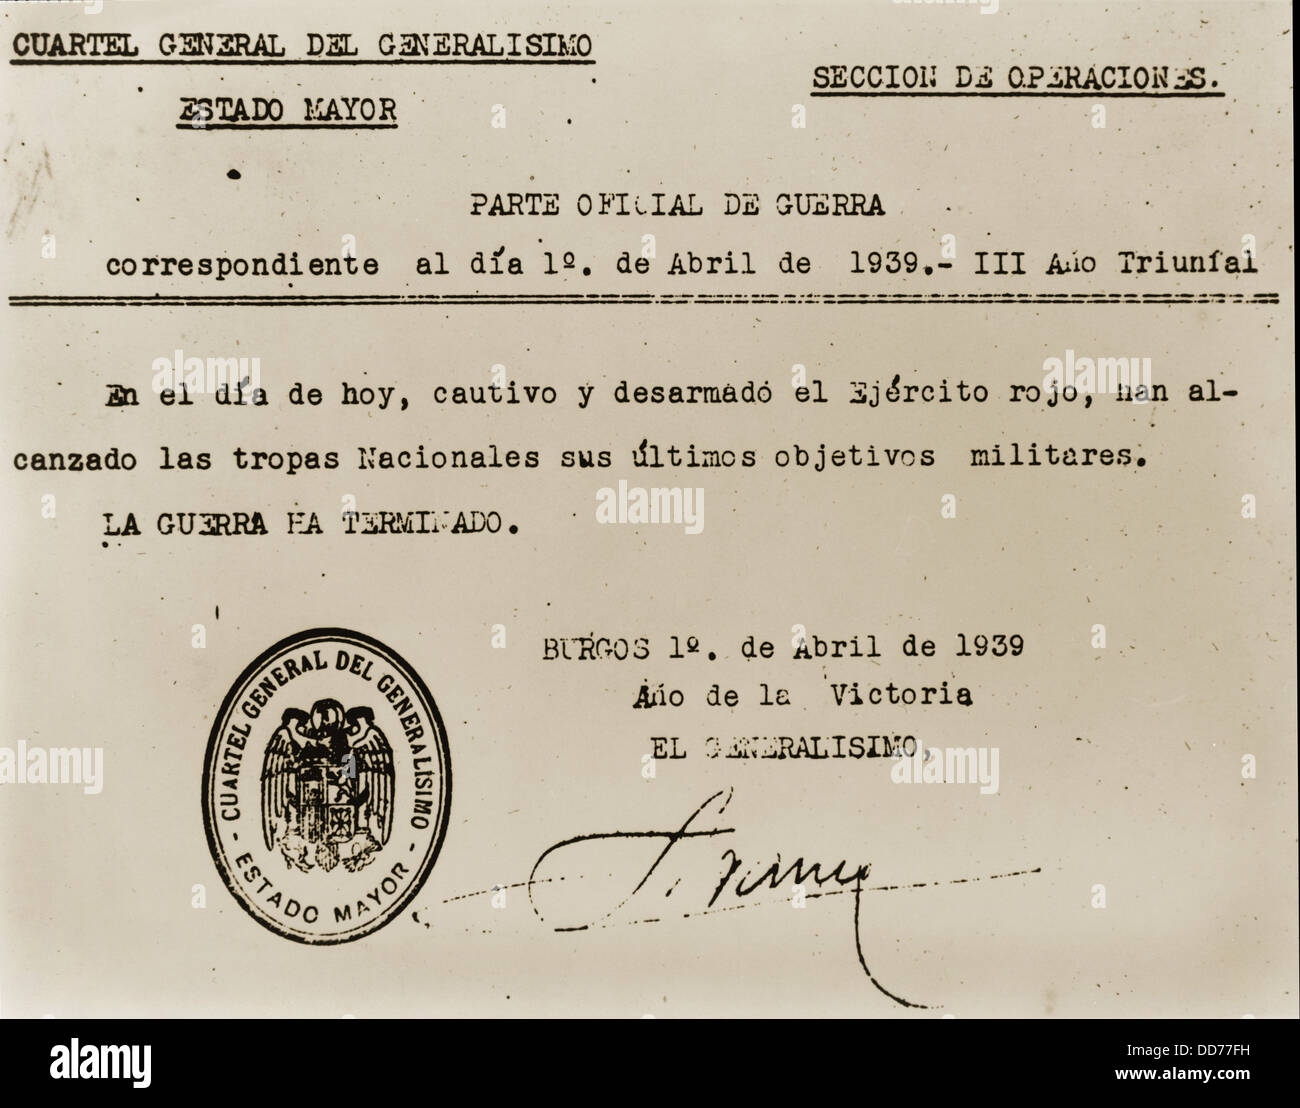 Official statement by Francisco Franco declaring the end of the Spanish Civil War. 1939. (BSLOC 2013 9 149) Stock Photo